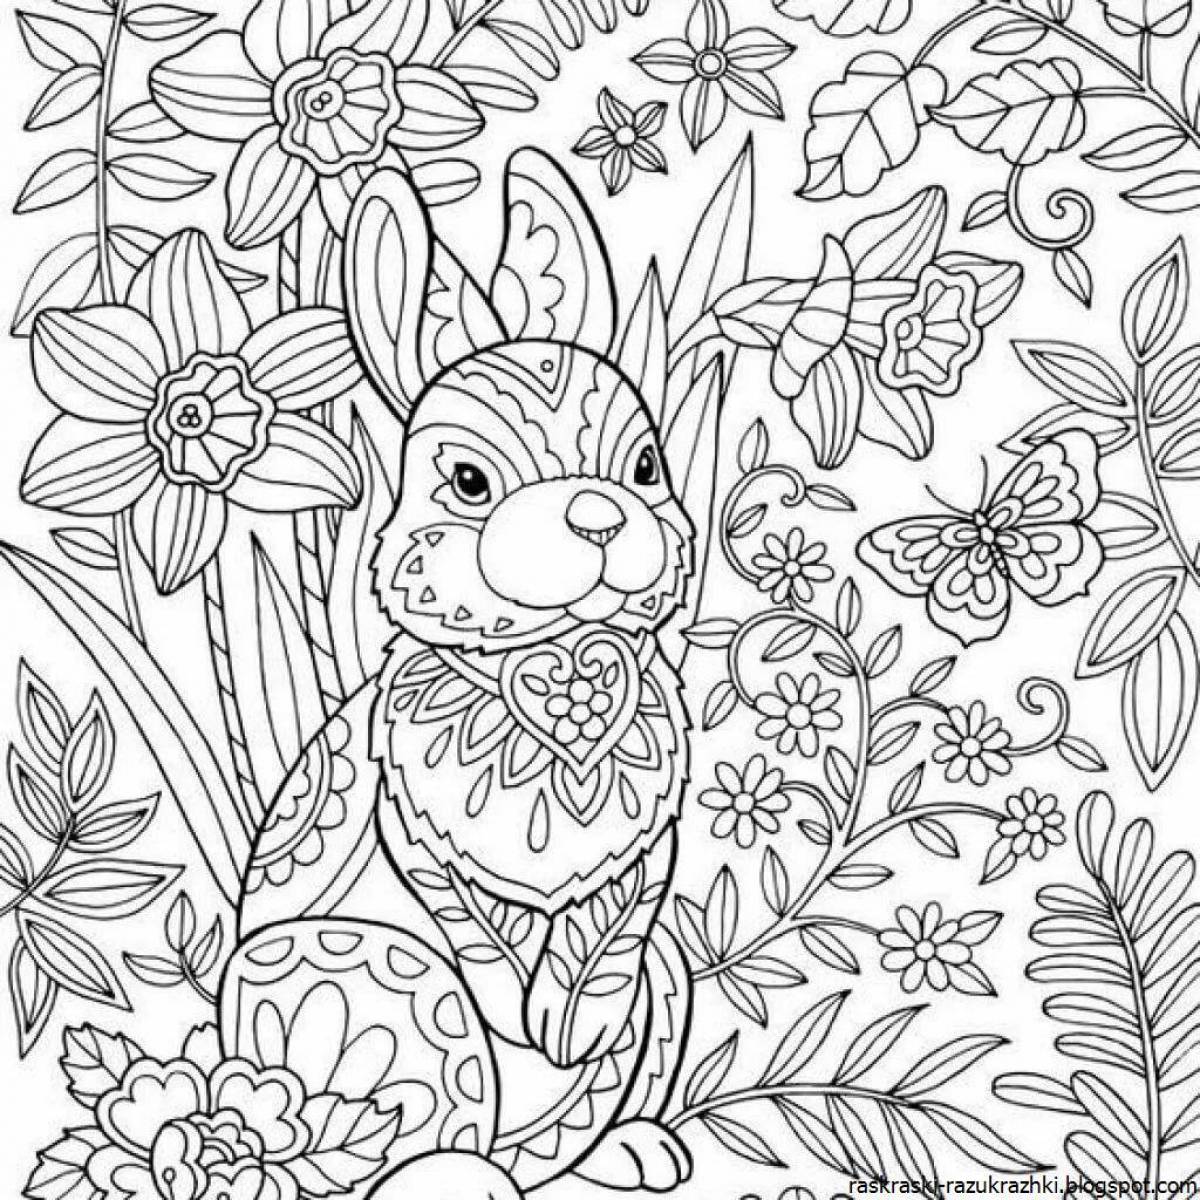 Creative anti-stress coloring book for children 6-7 years old